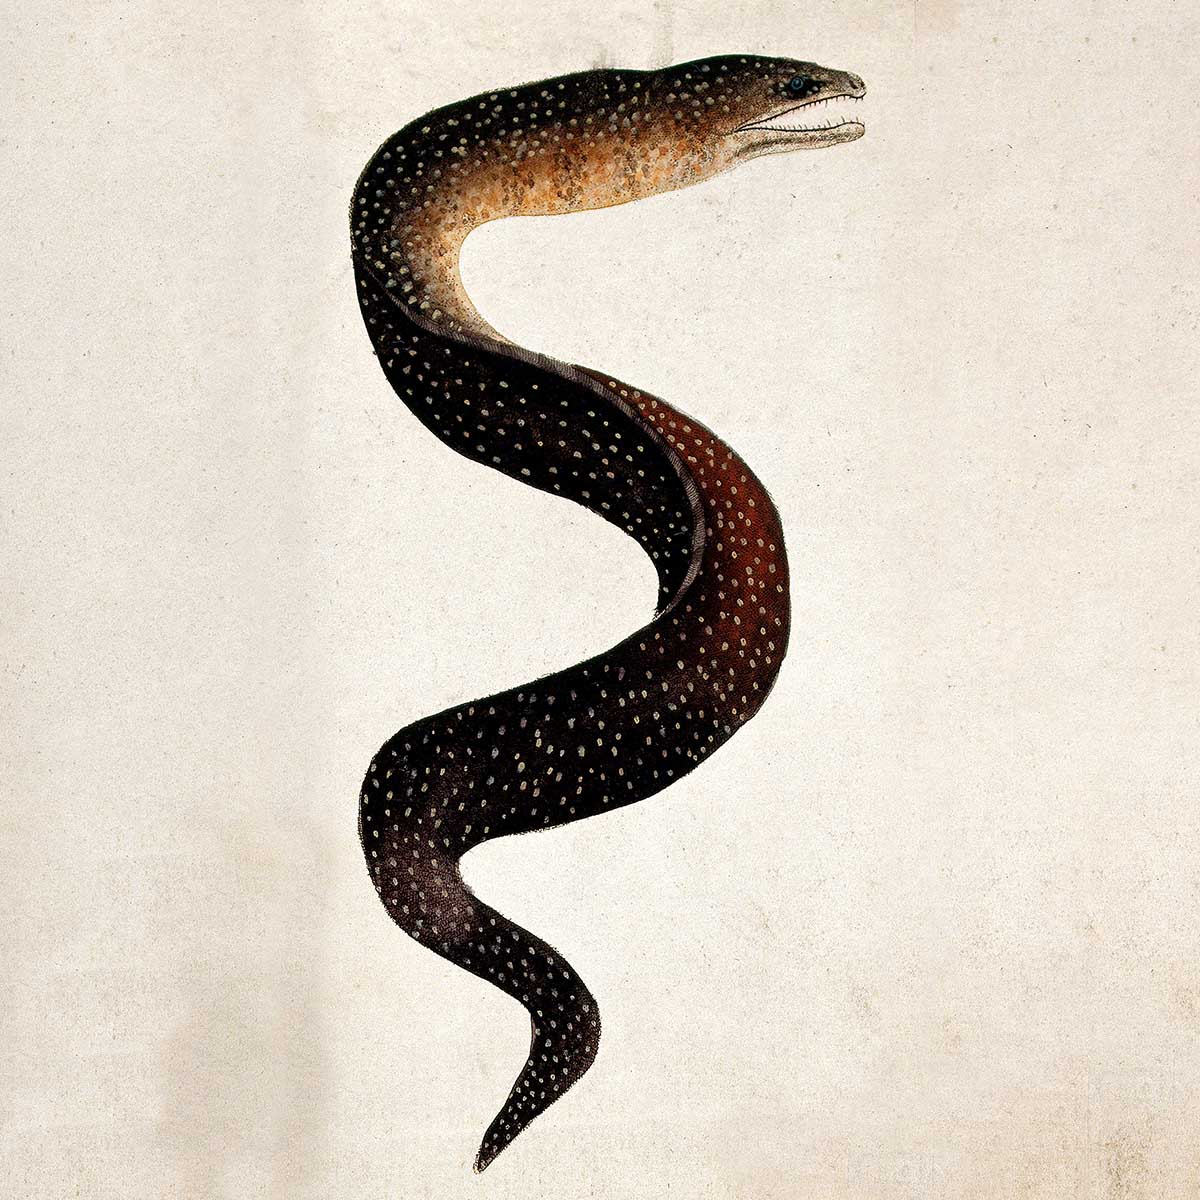 Slippery character: a spotted eel, coloured etching, c.19th century. Wellcome Images.